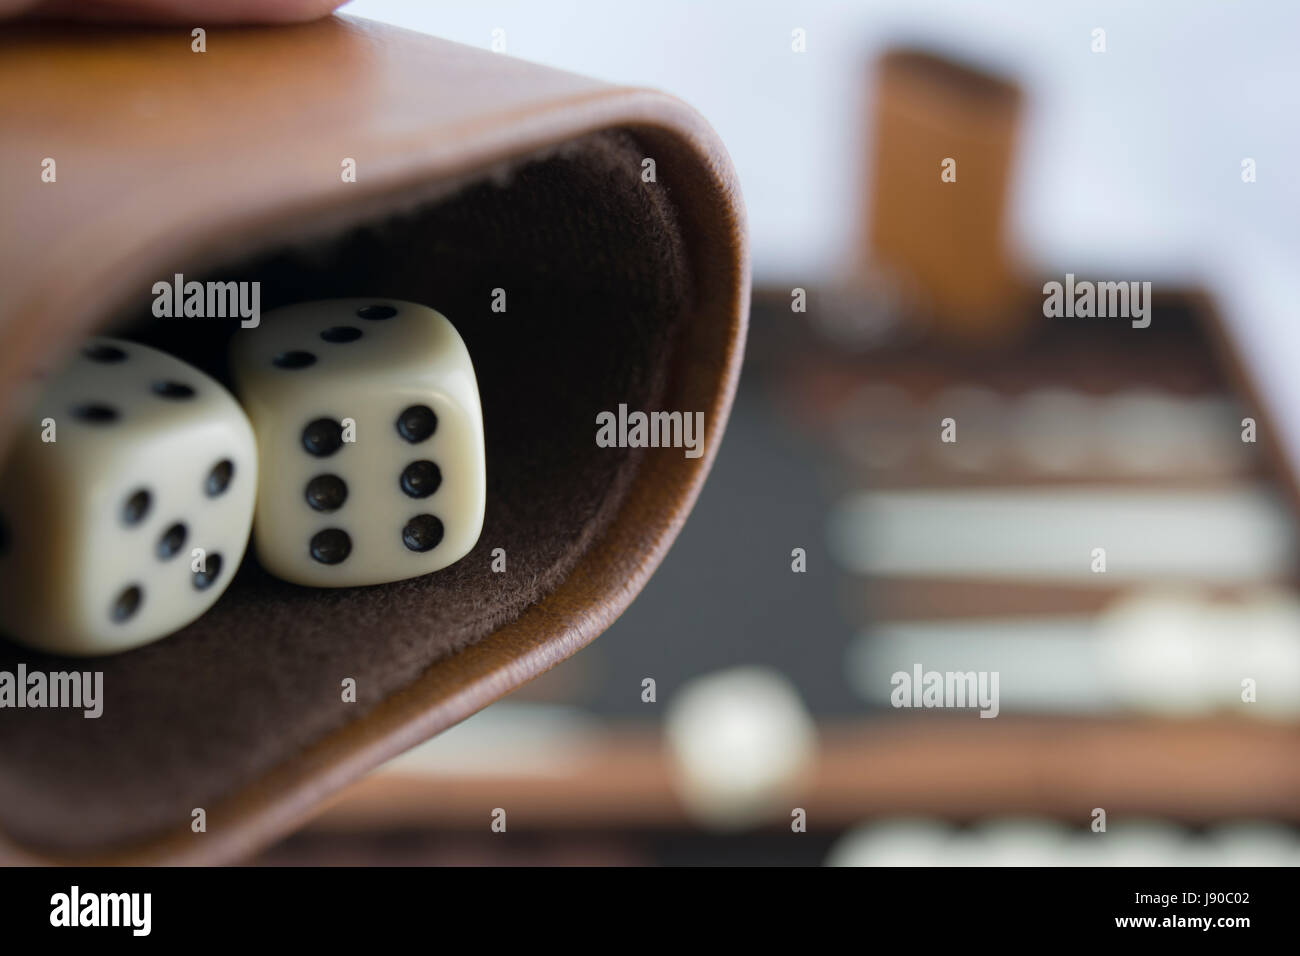 Readying to roll backgammon dice on the brown and cream backgammon board blurred in the background. Focusing on the dice in the dice cup. Stock Photo